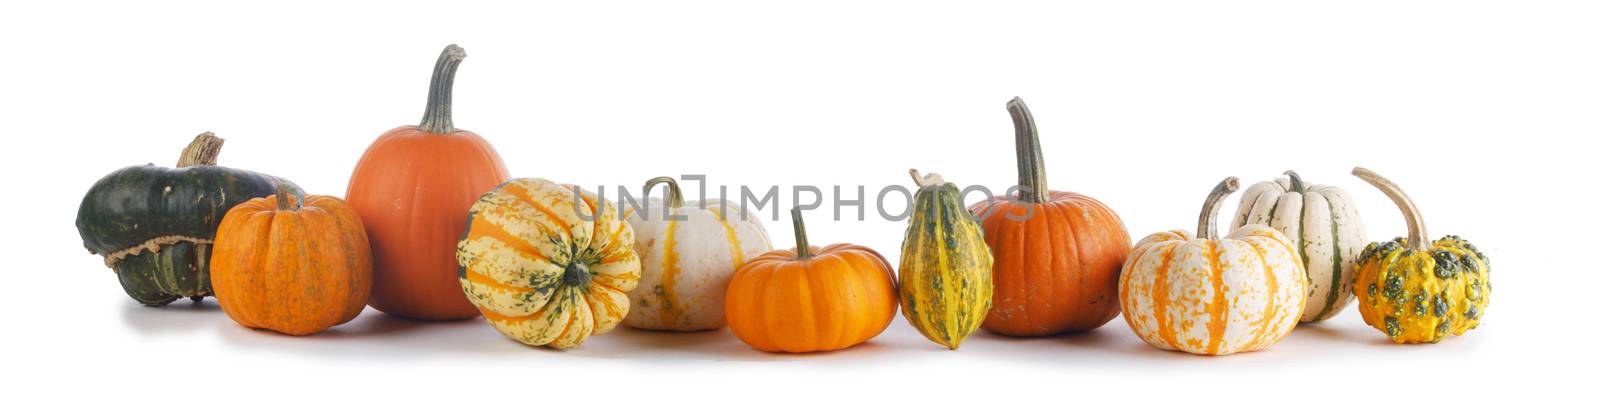 Assortiment of pumpkins on white by Yellowj